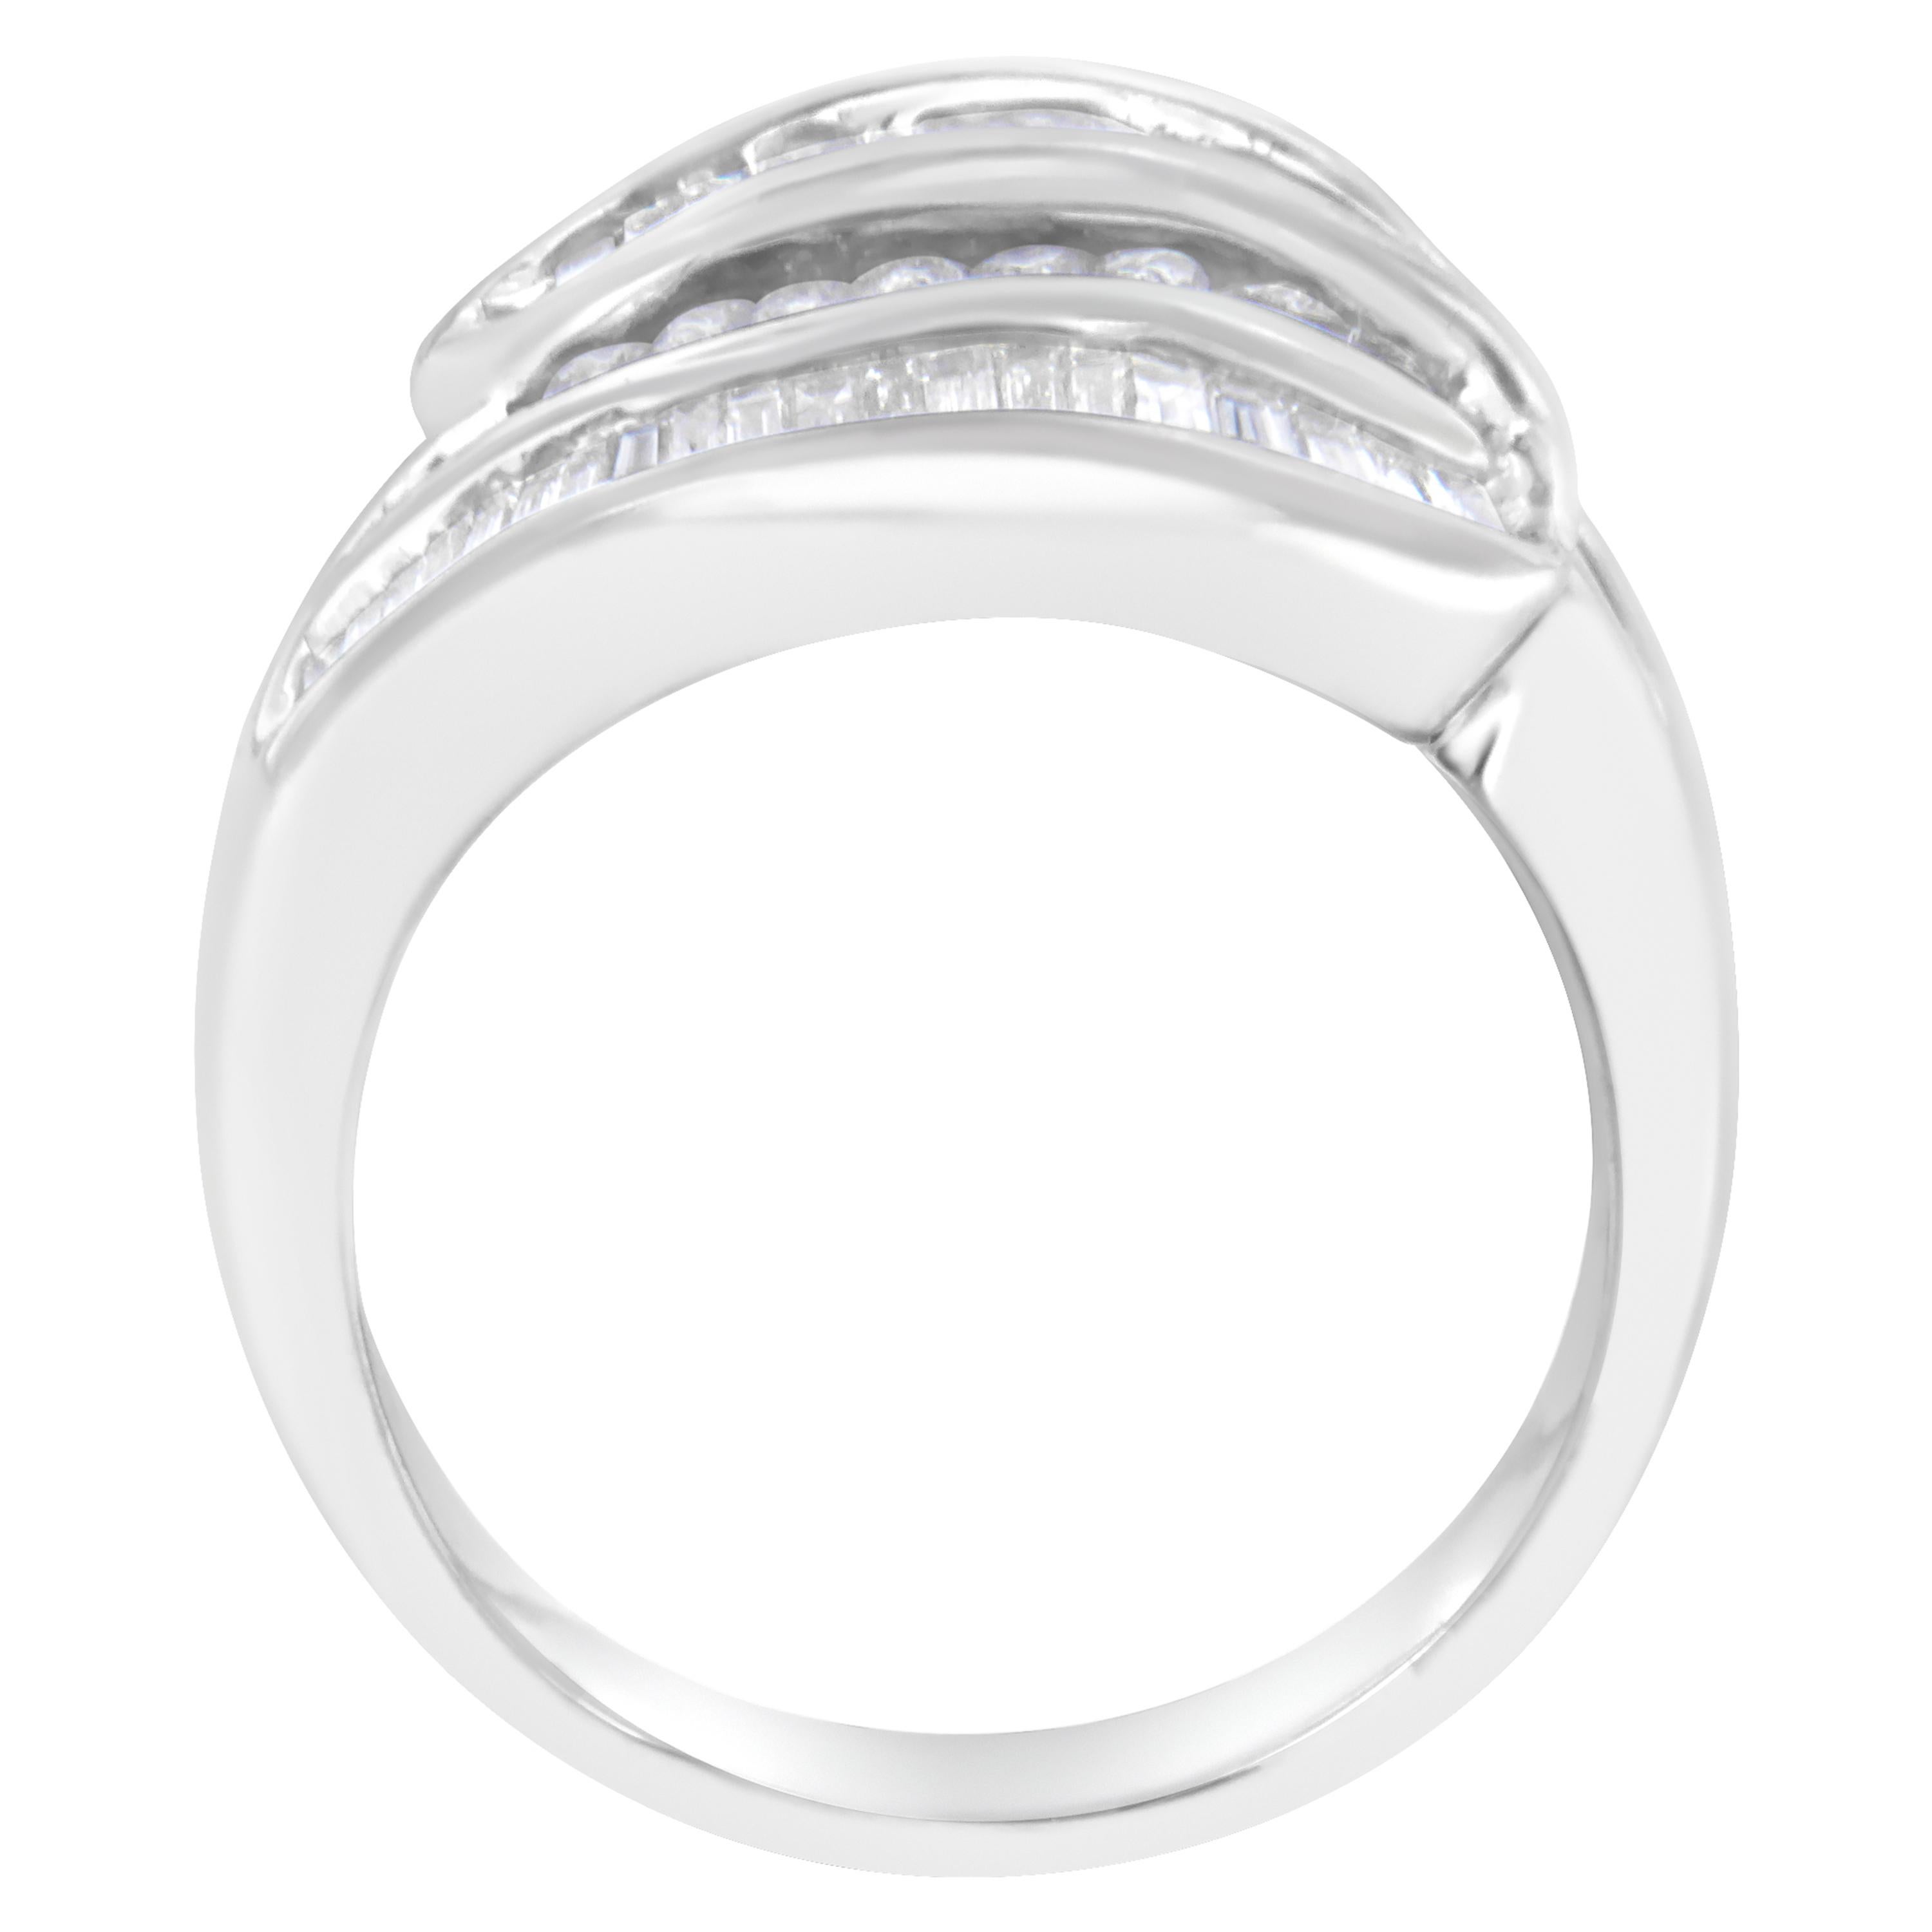 Contemporary 14K White Gold 1.0 Carat Diamond Bypass Band Ring For Sale